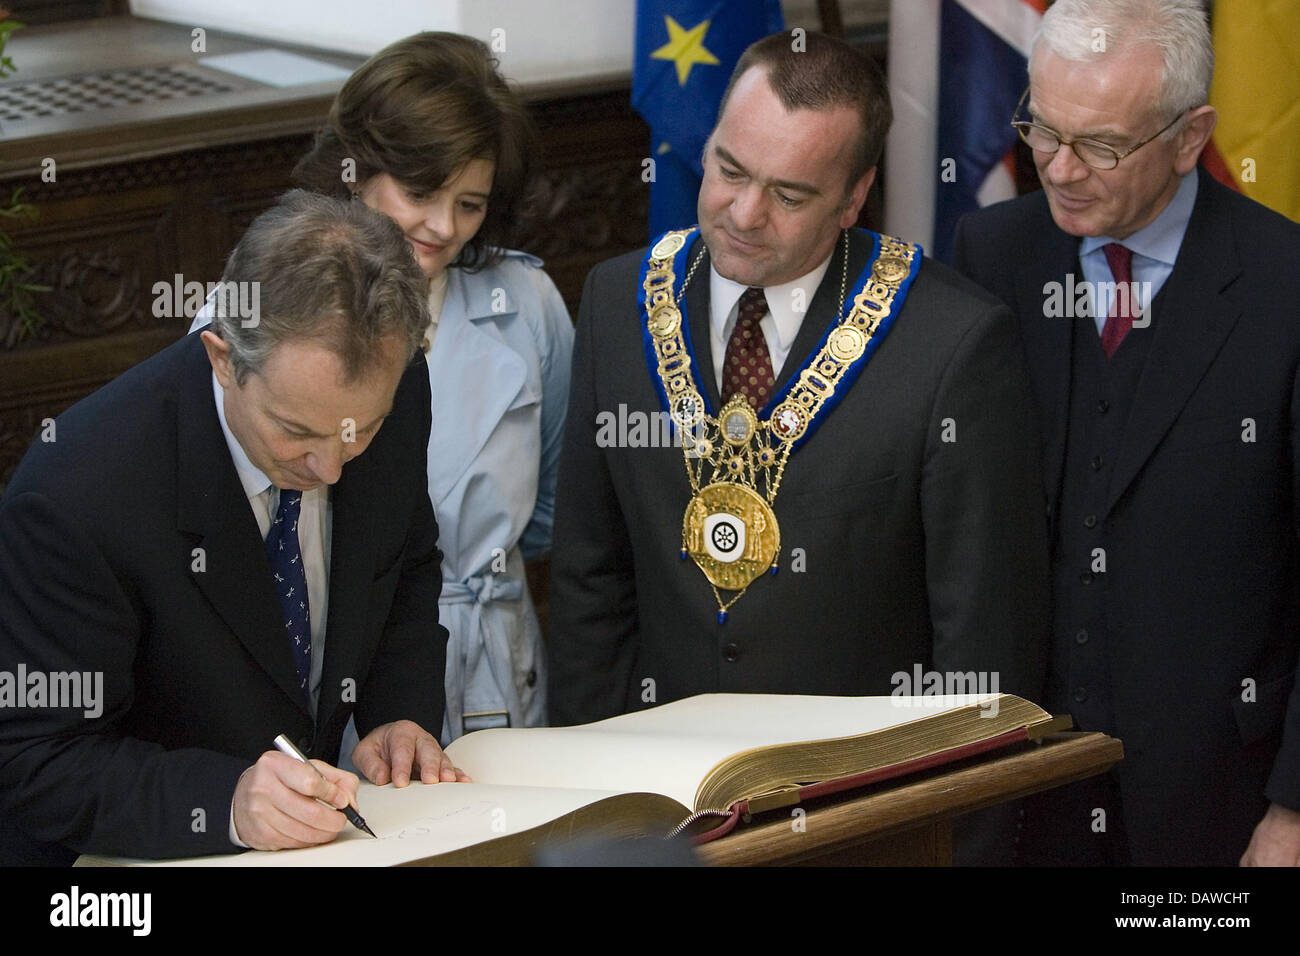 British Prime Minister Tony Blair (L) signs the Golden Book of the city of Osnabrueck next to his wife Cherie (2nd from L), Osnabrueck's Lord Mayor Boris Pistorius (2nd from R) and Hans-Gert Poettering, President of the European Parliament, at the 'Friedenssaal' of Osnabrueck City Hall, Germany, Sunday, 25 March 2007. On the invitation of Poettering Blair payed a stopover visit to  Stock Photo